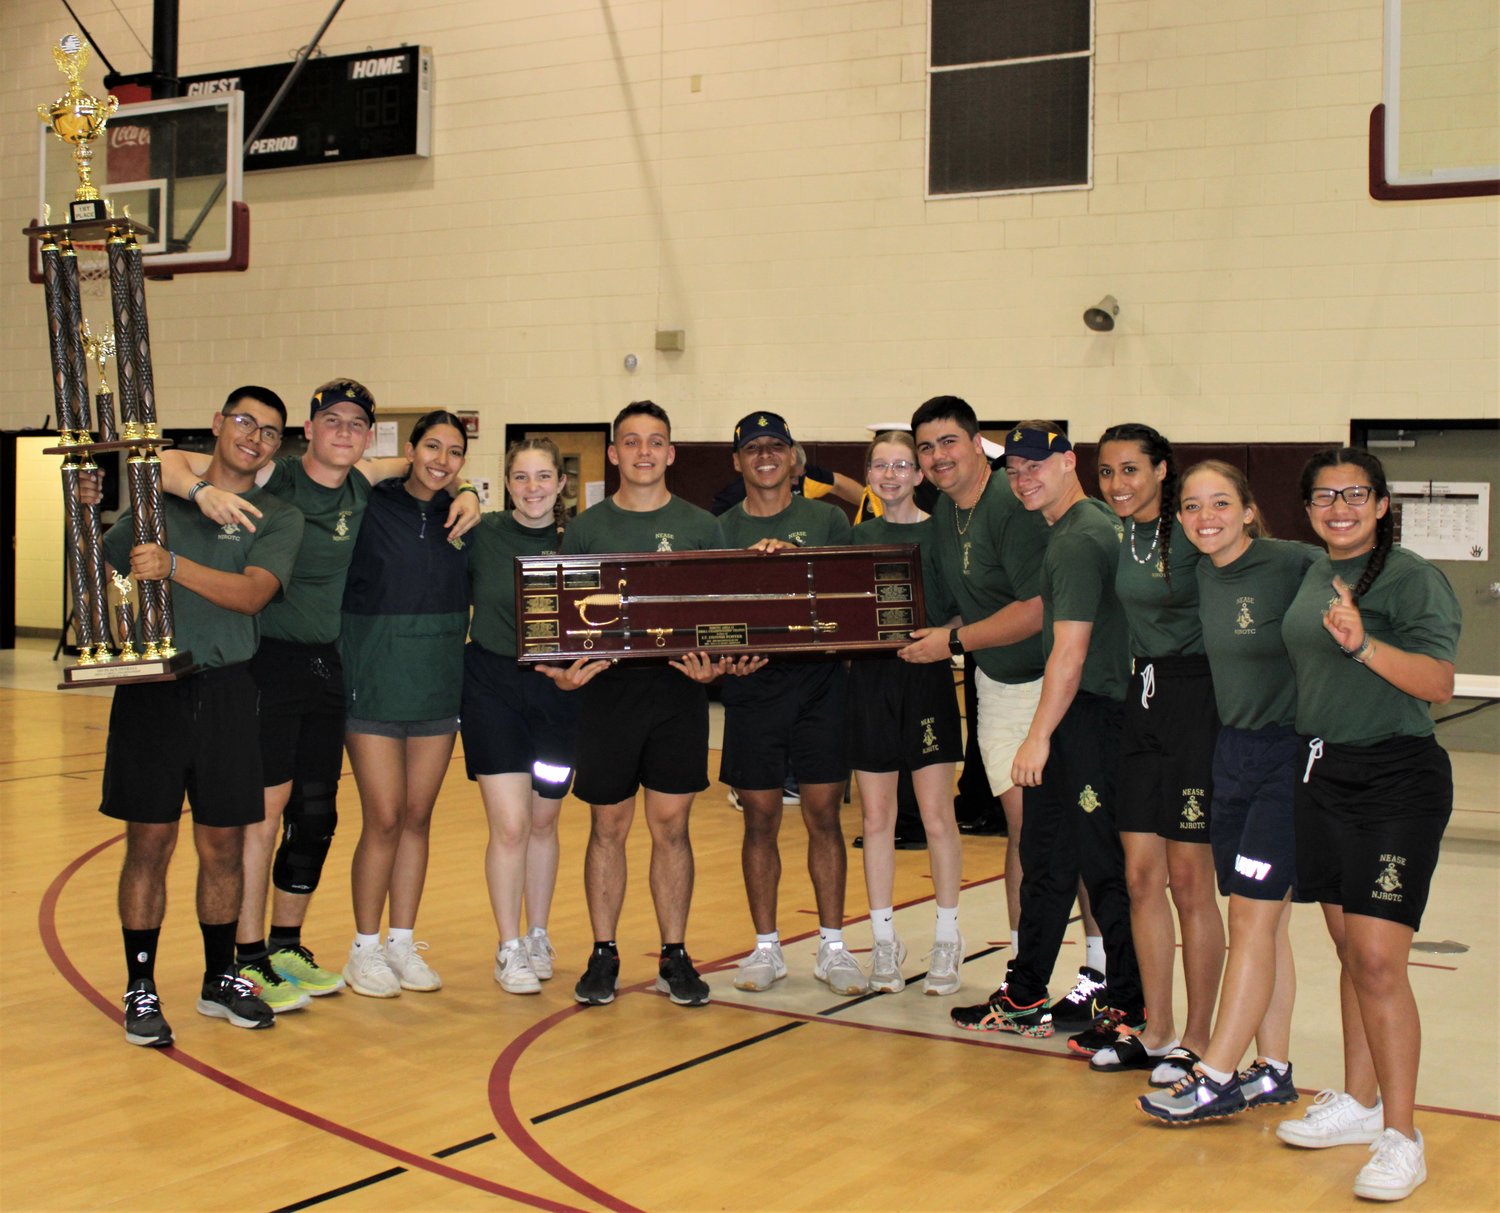 The Nease NJROTC Senior Cadets accept the overall first place trophy at the Area 12 Drill Championships March 5.